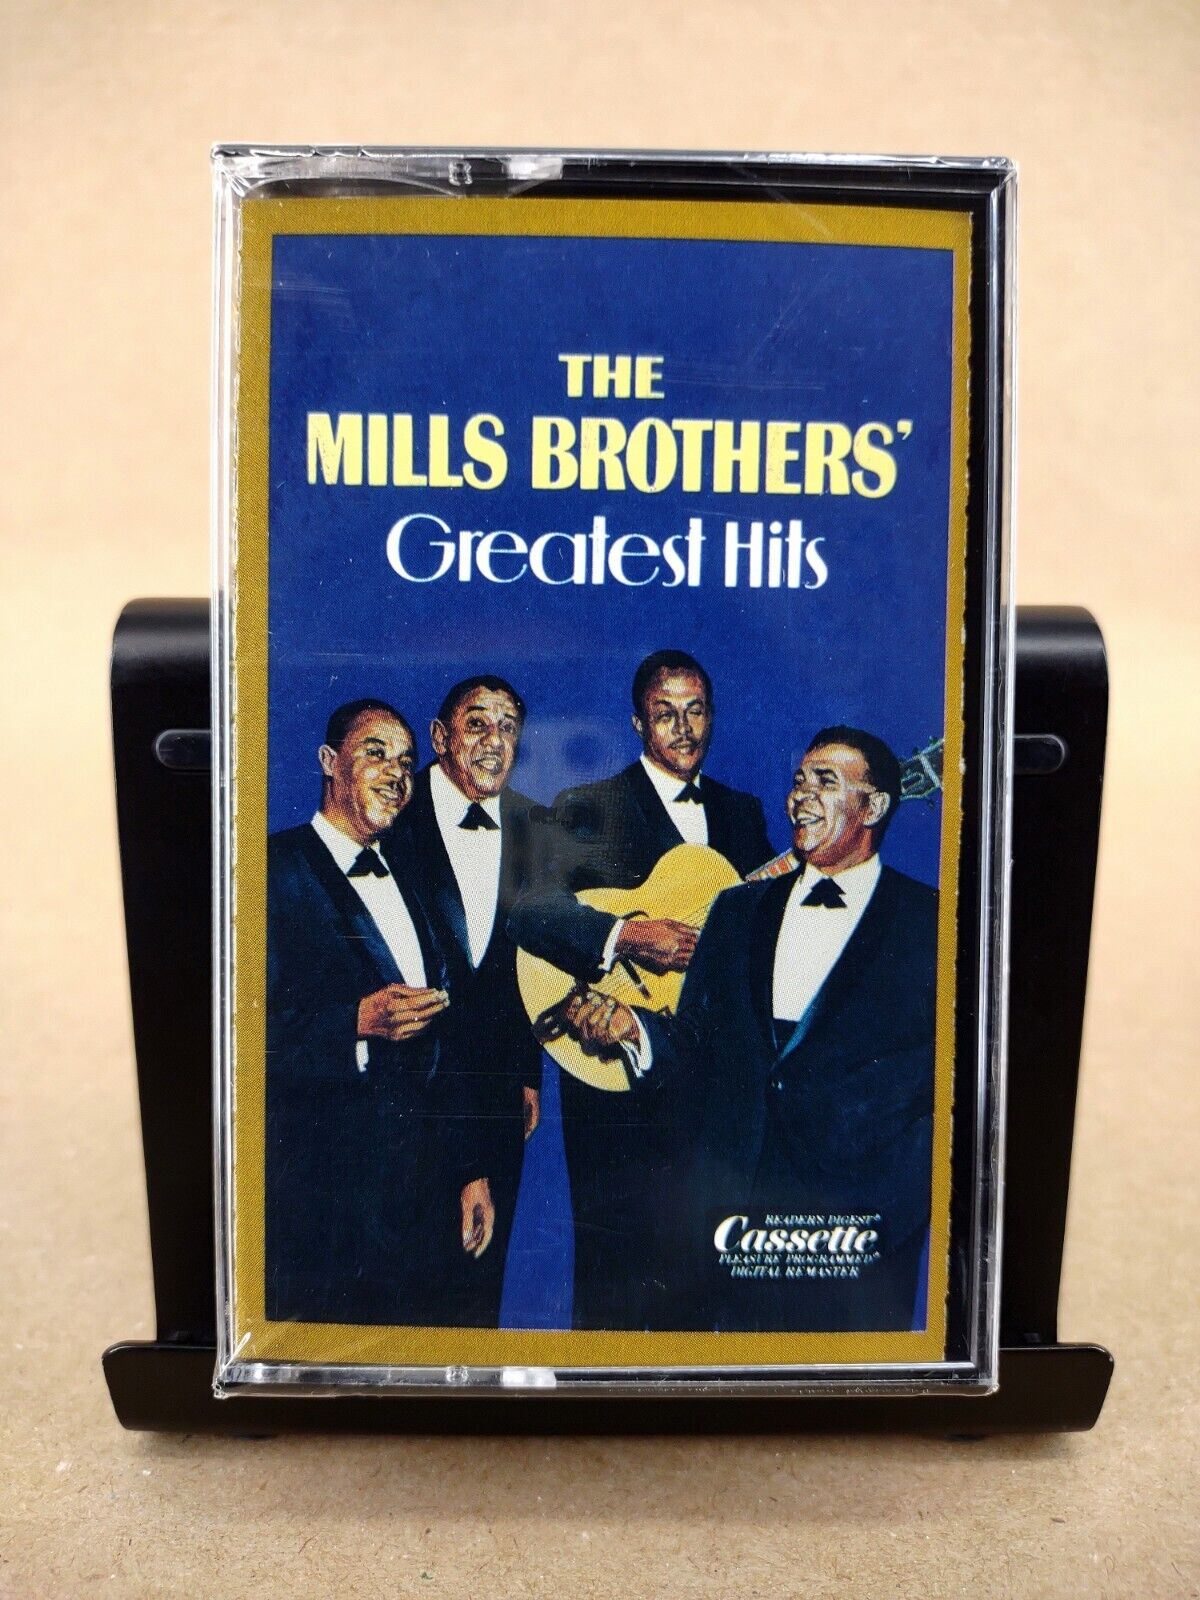 THE MILLS BROTHERS Greatest Hits Cassette Readers Digest Vintage 1986 